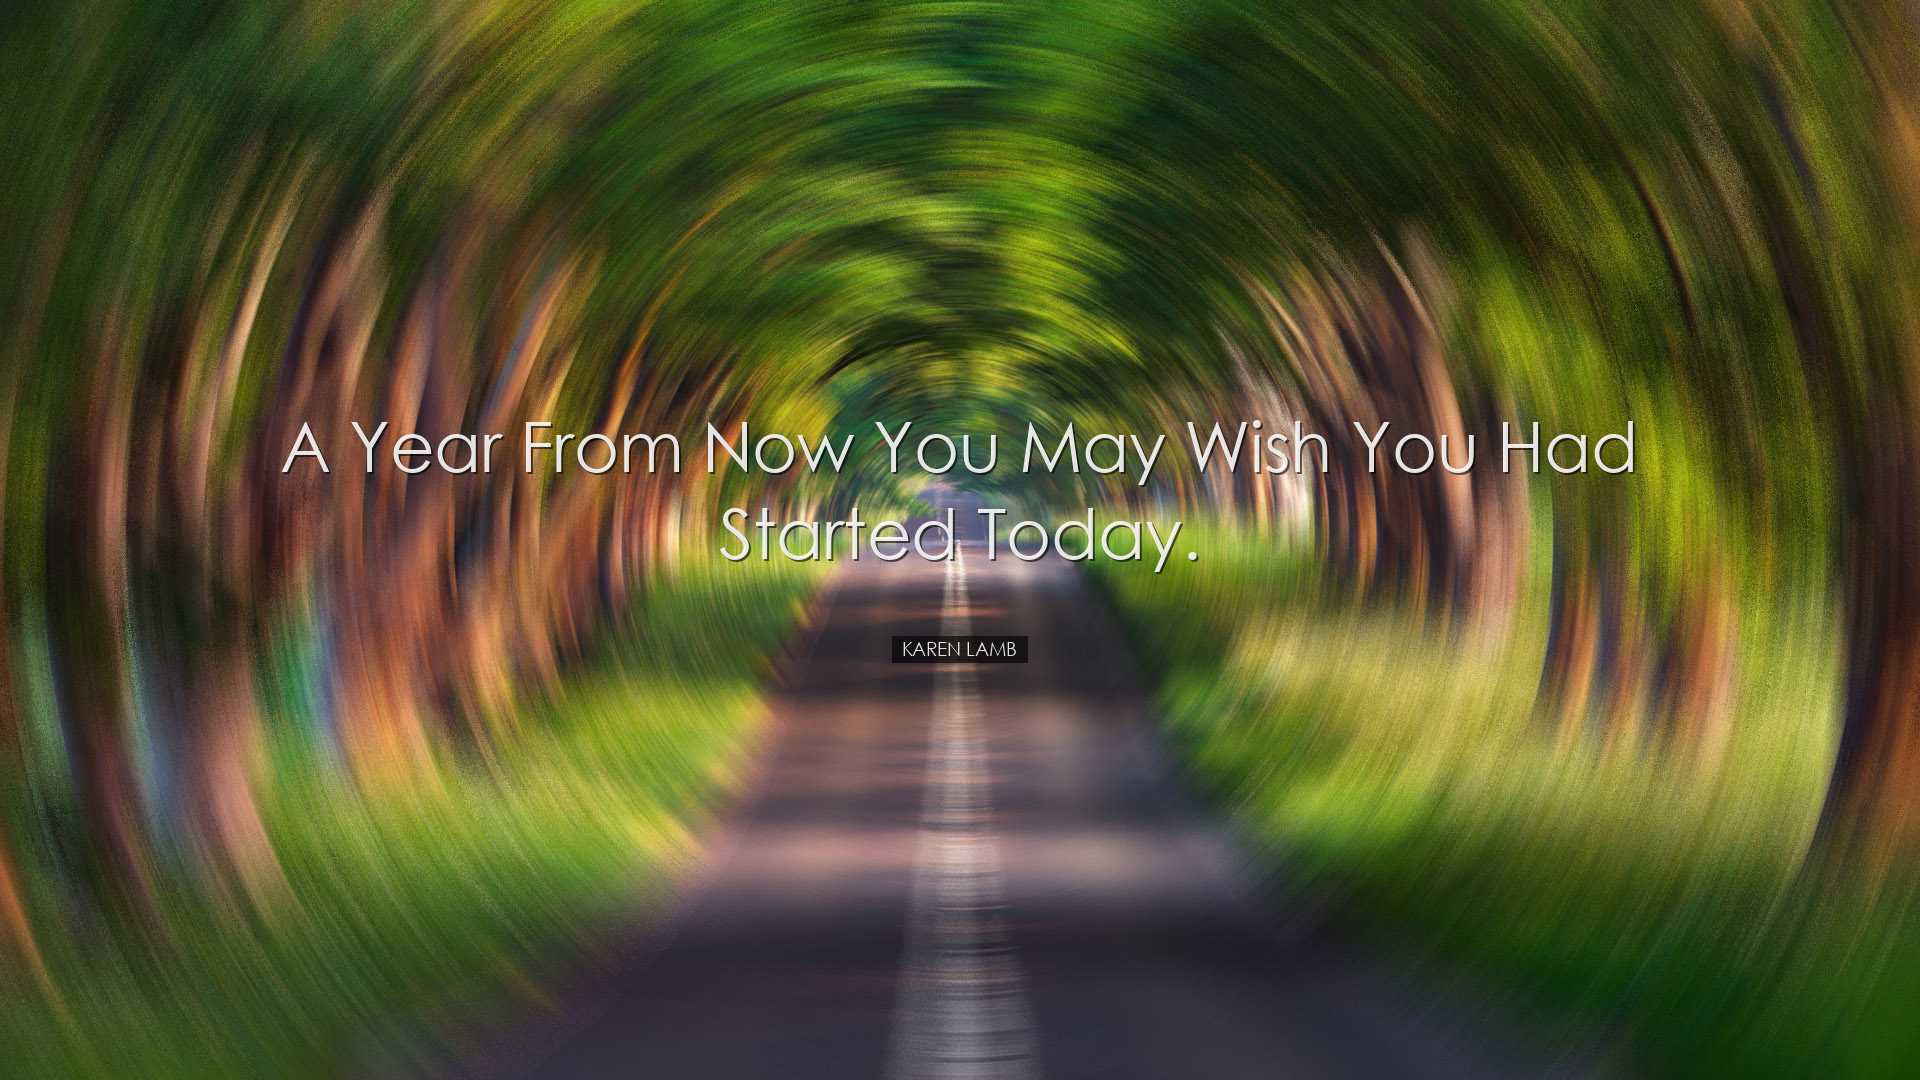 A year from now you may wish you had started today. - Karen Lamb